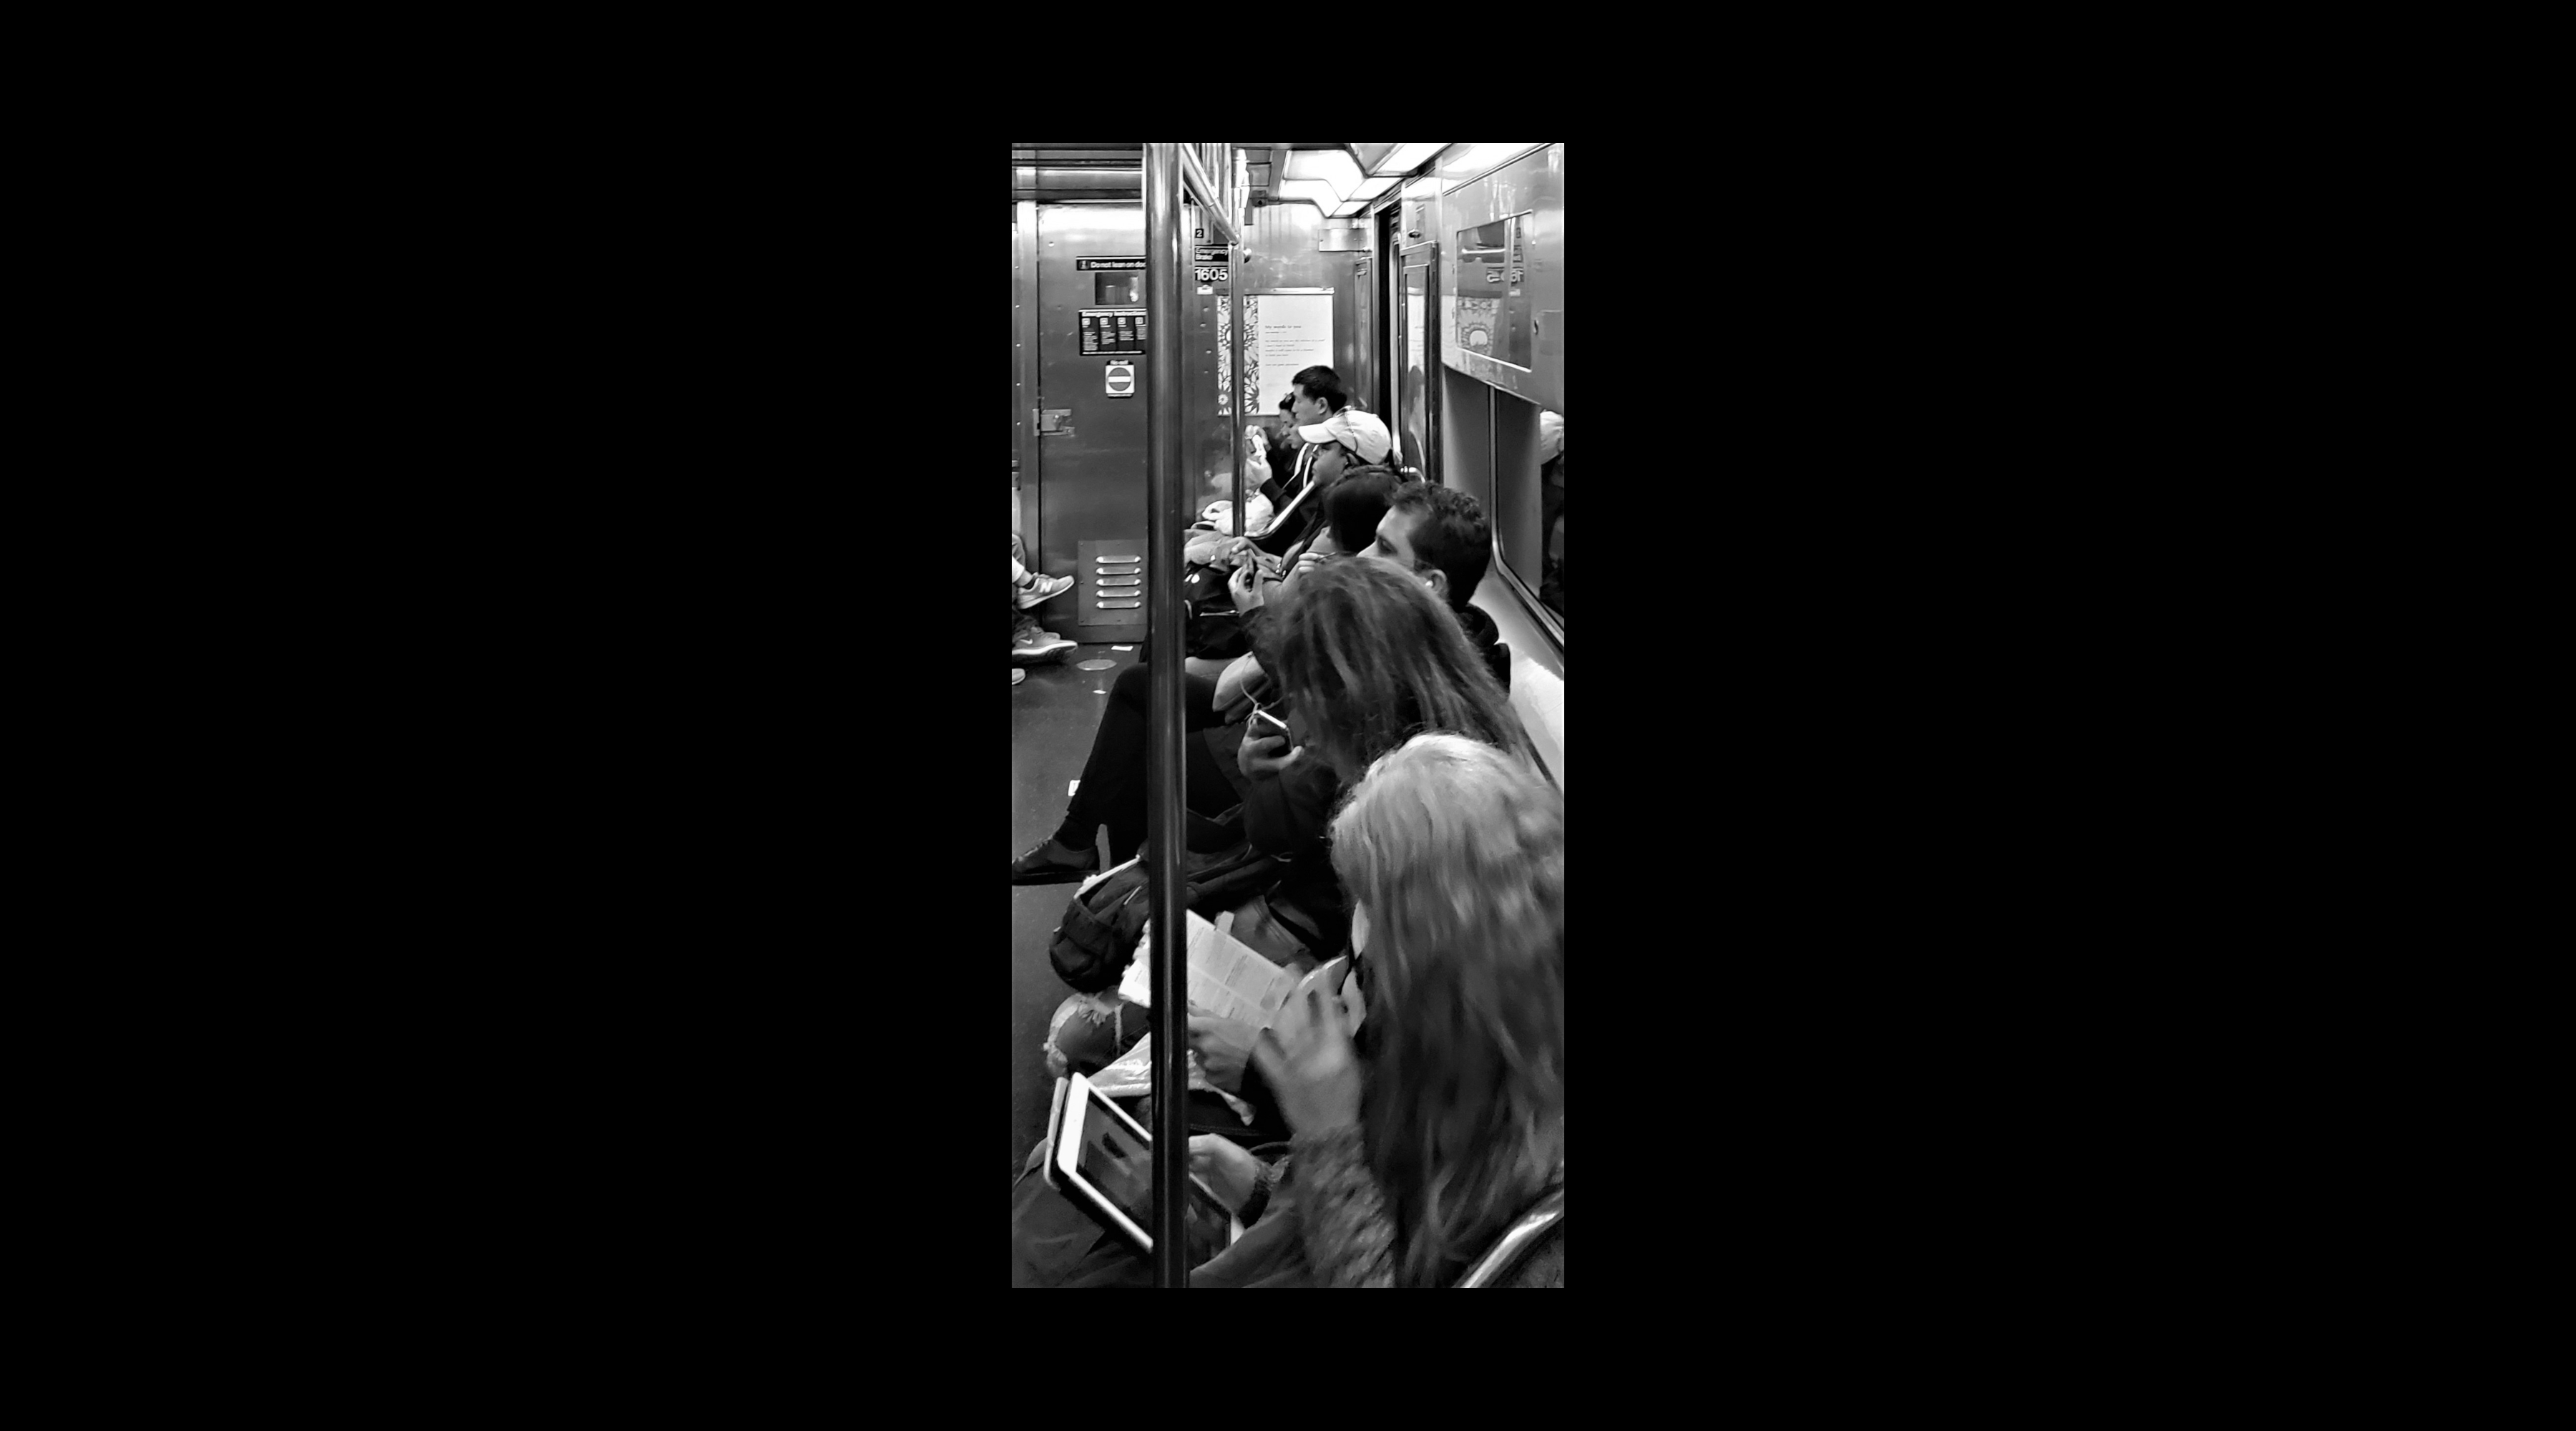 A row of subway commuters, from an angle slightly above their heads (in black and white)